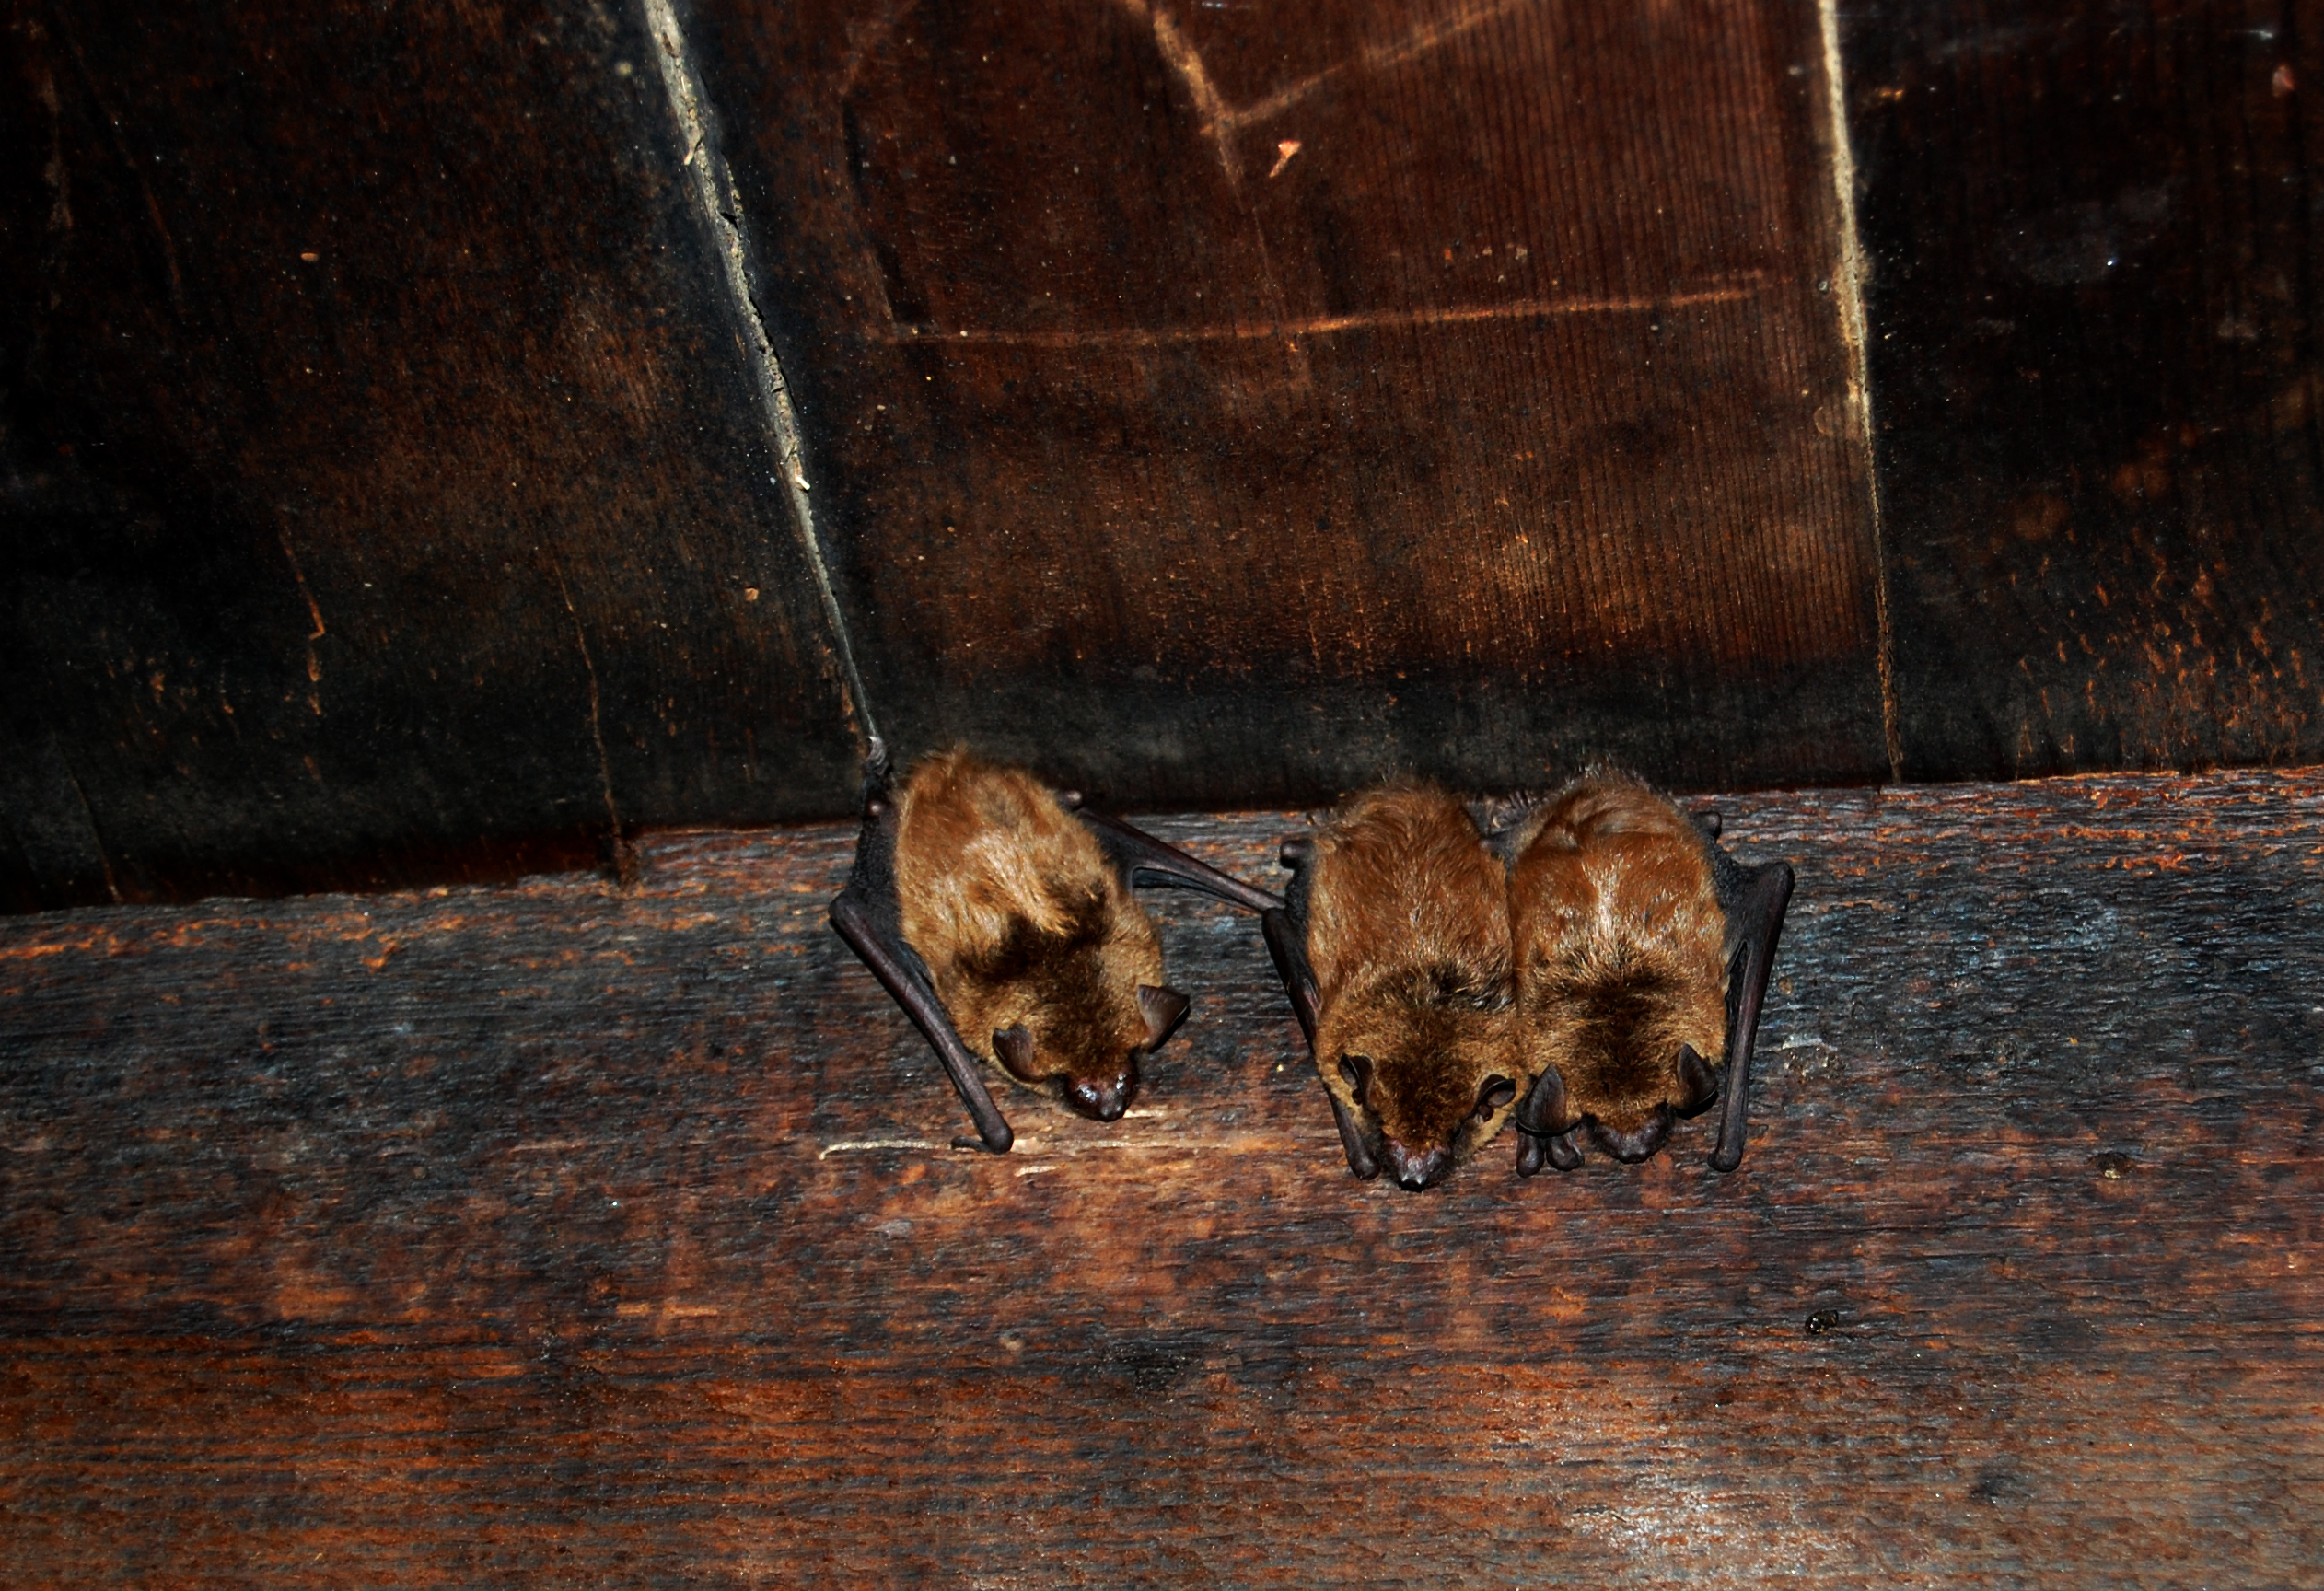 Bats in Home can bring diseases like Histoplasmosis. Elite Wildlife Services